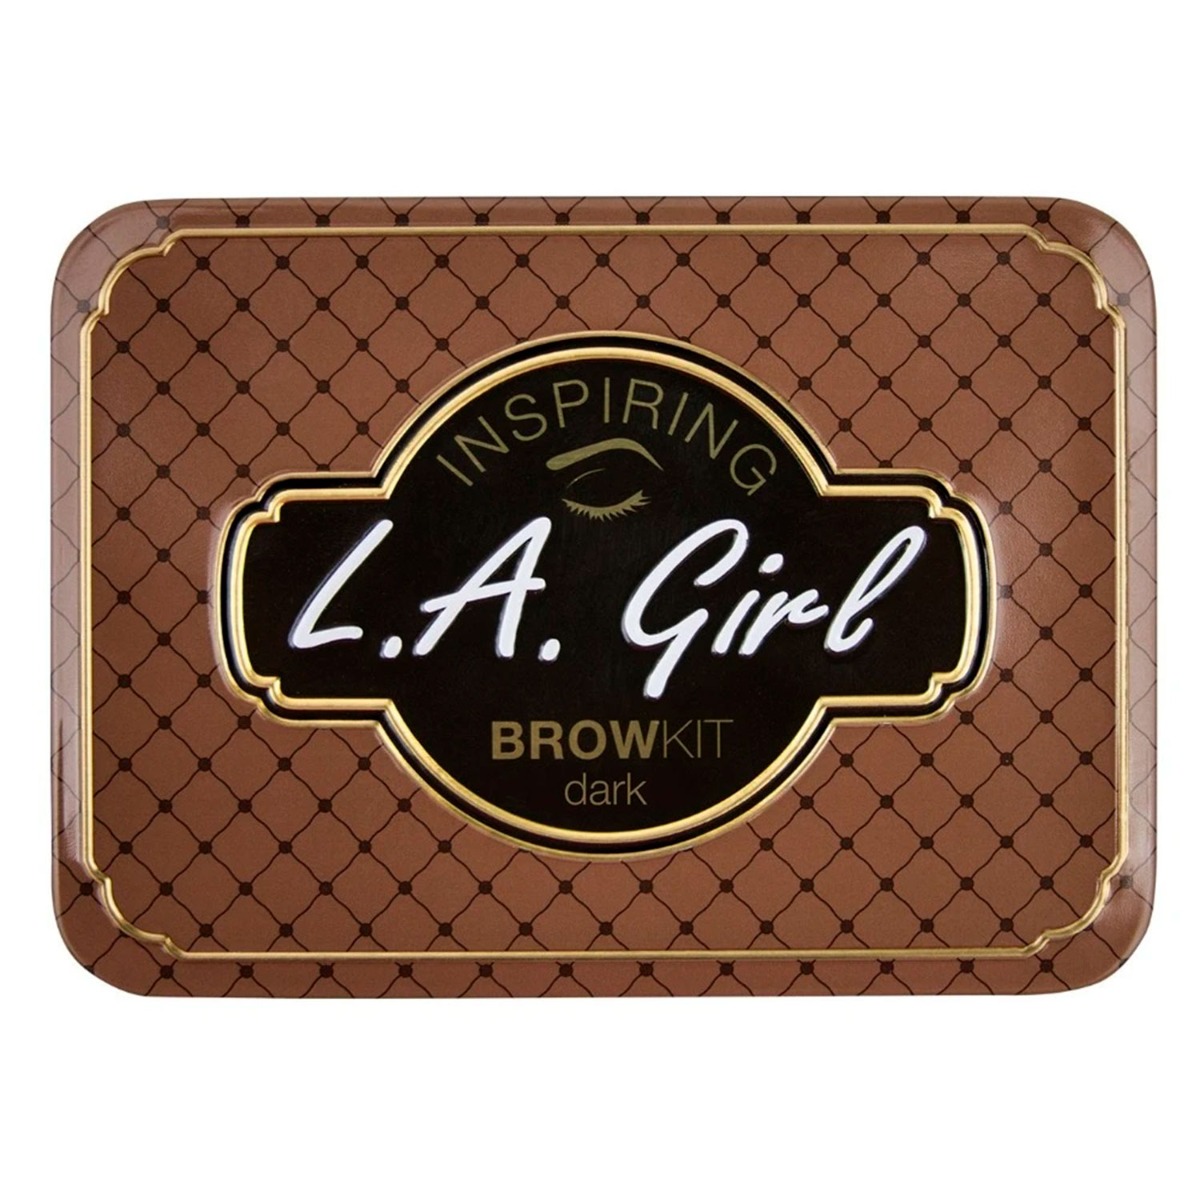 L.A. Girl Inspiring Brow Kit Dark and Defined, 6gm